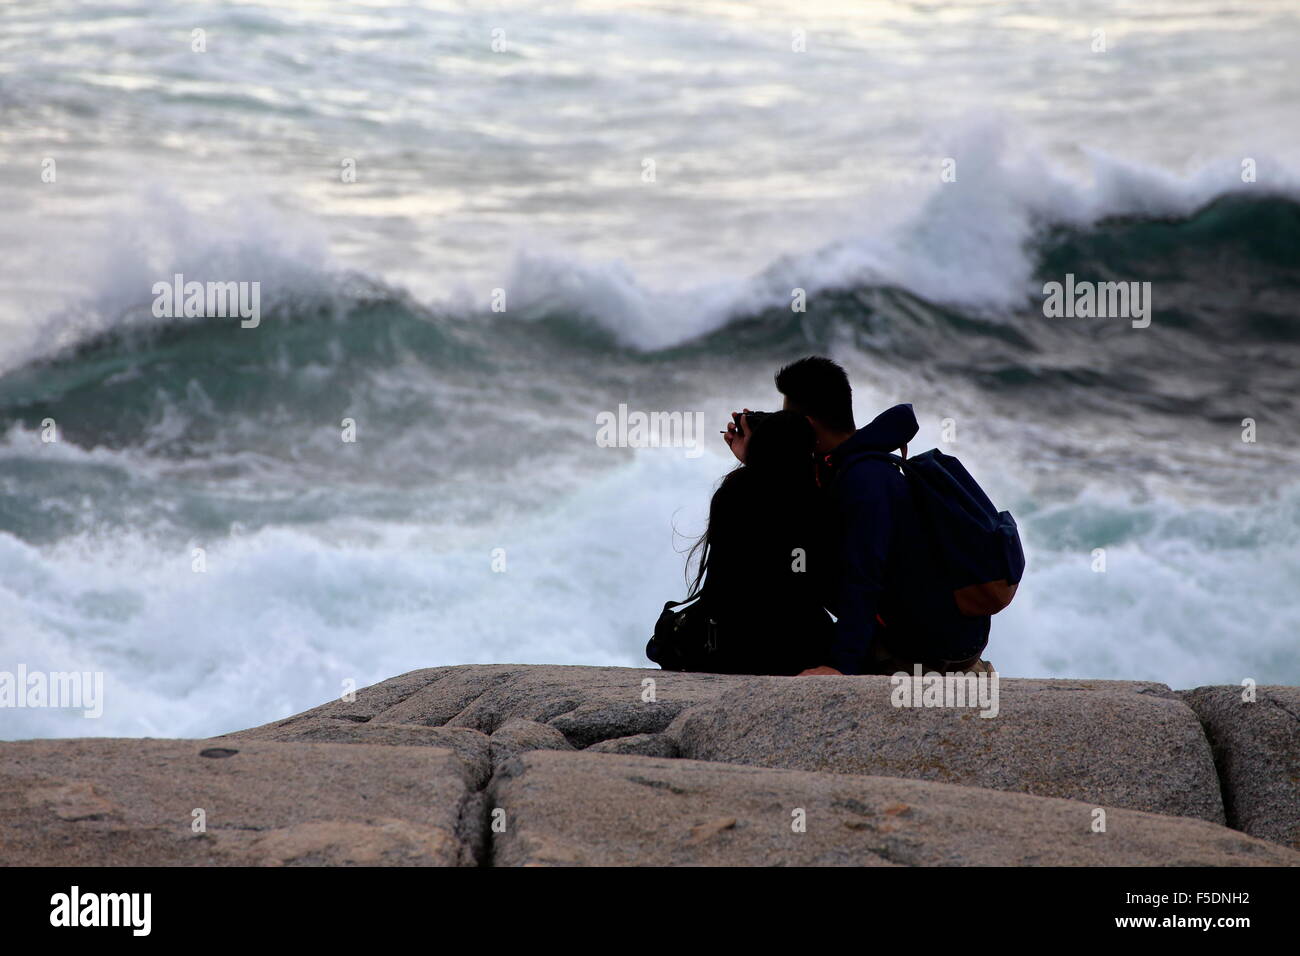 A couple or two people on the rocks at Peggy's Cove, Nova Scotia that are too close to the waves and in danger of drowning. Stock Photo